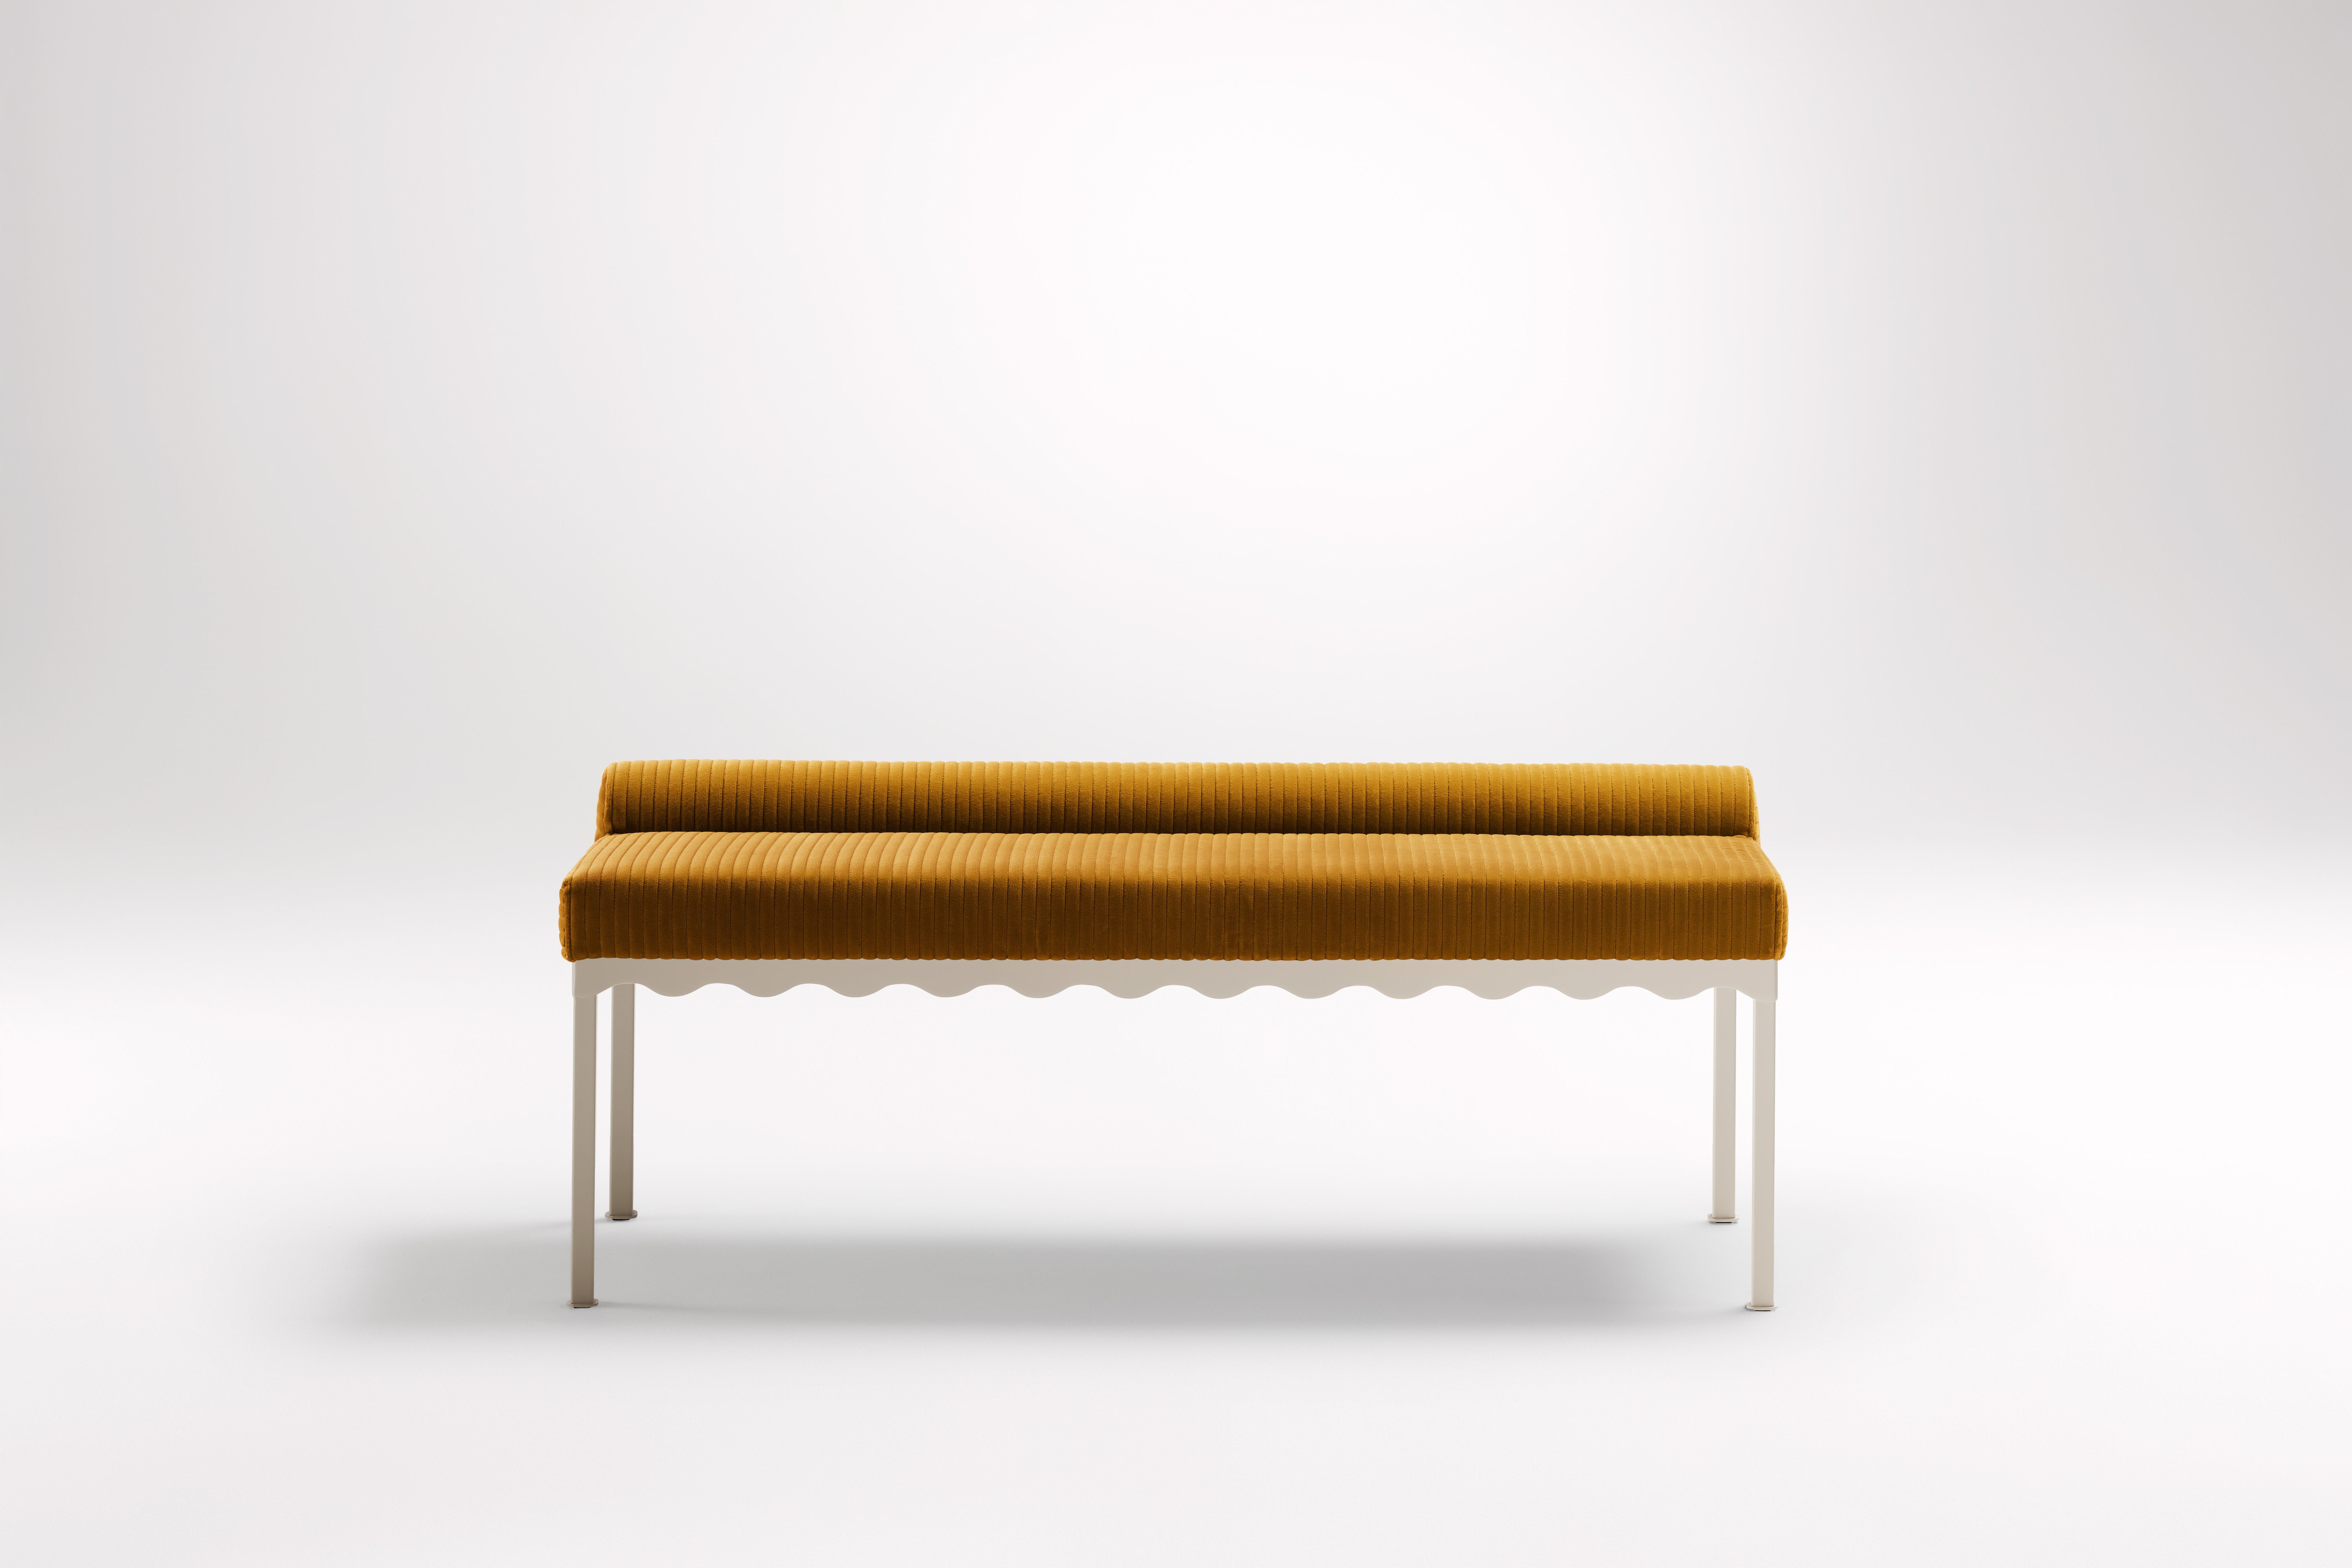 Mikado Bellini 1340 Bench by Coco Flip
Dimensions: D 134 x W 54 x H 52.5 cm
Materials: Timber / Upholstered tops, Powder-coated steel frame. 
Weight: 20 kg
Frame Finishes: Textura Paperbark.

Coco Flip is a Melbourne based furniture and lighting